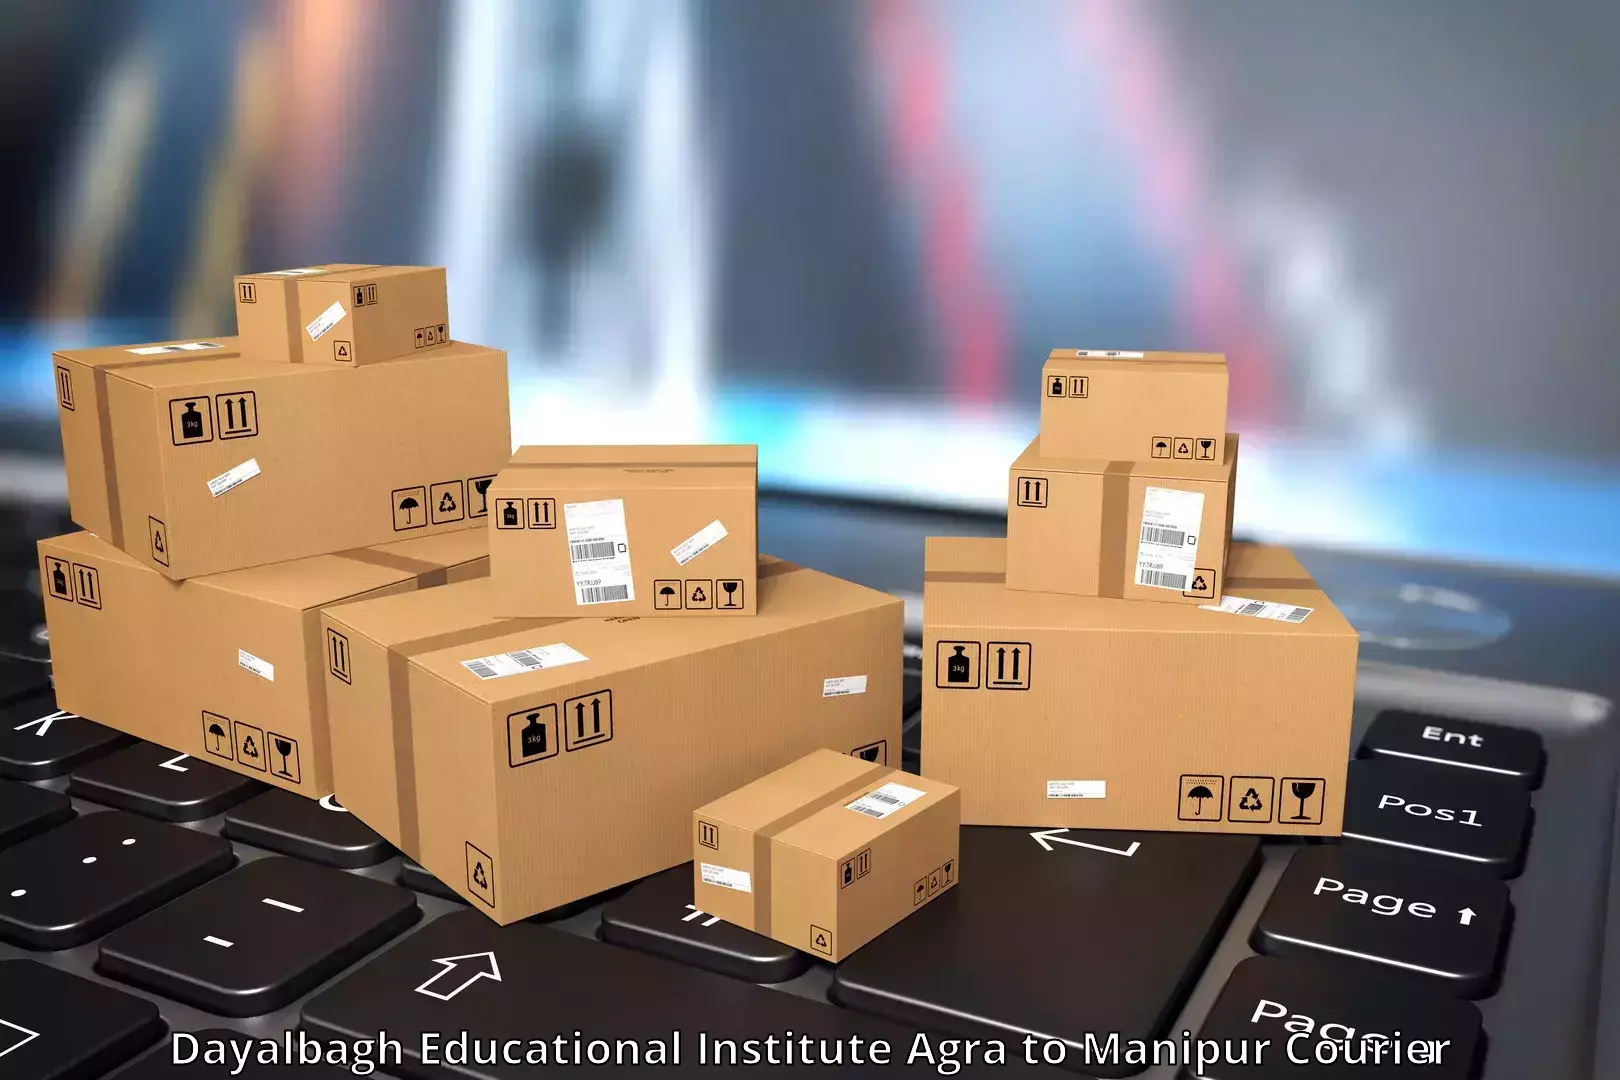 Personalized courier experiences Dayalbagh Educational Institute Agra to Chandel